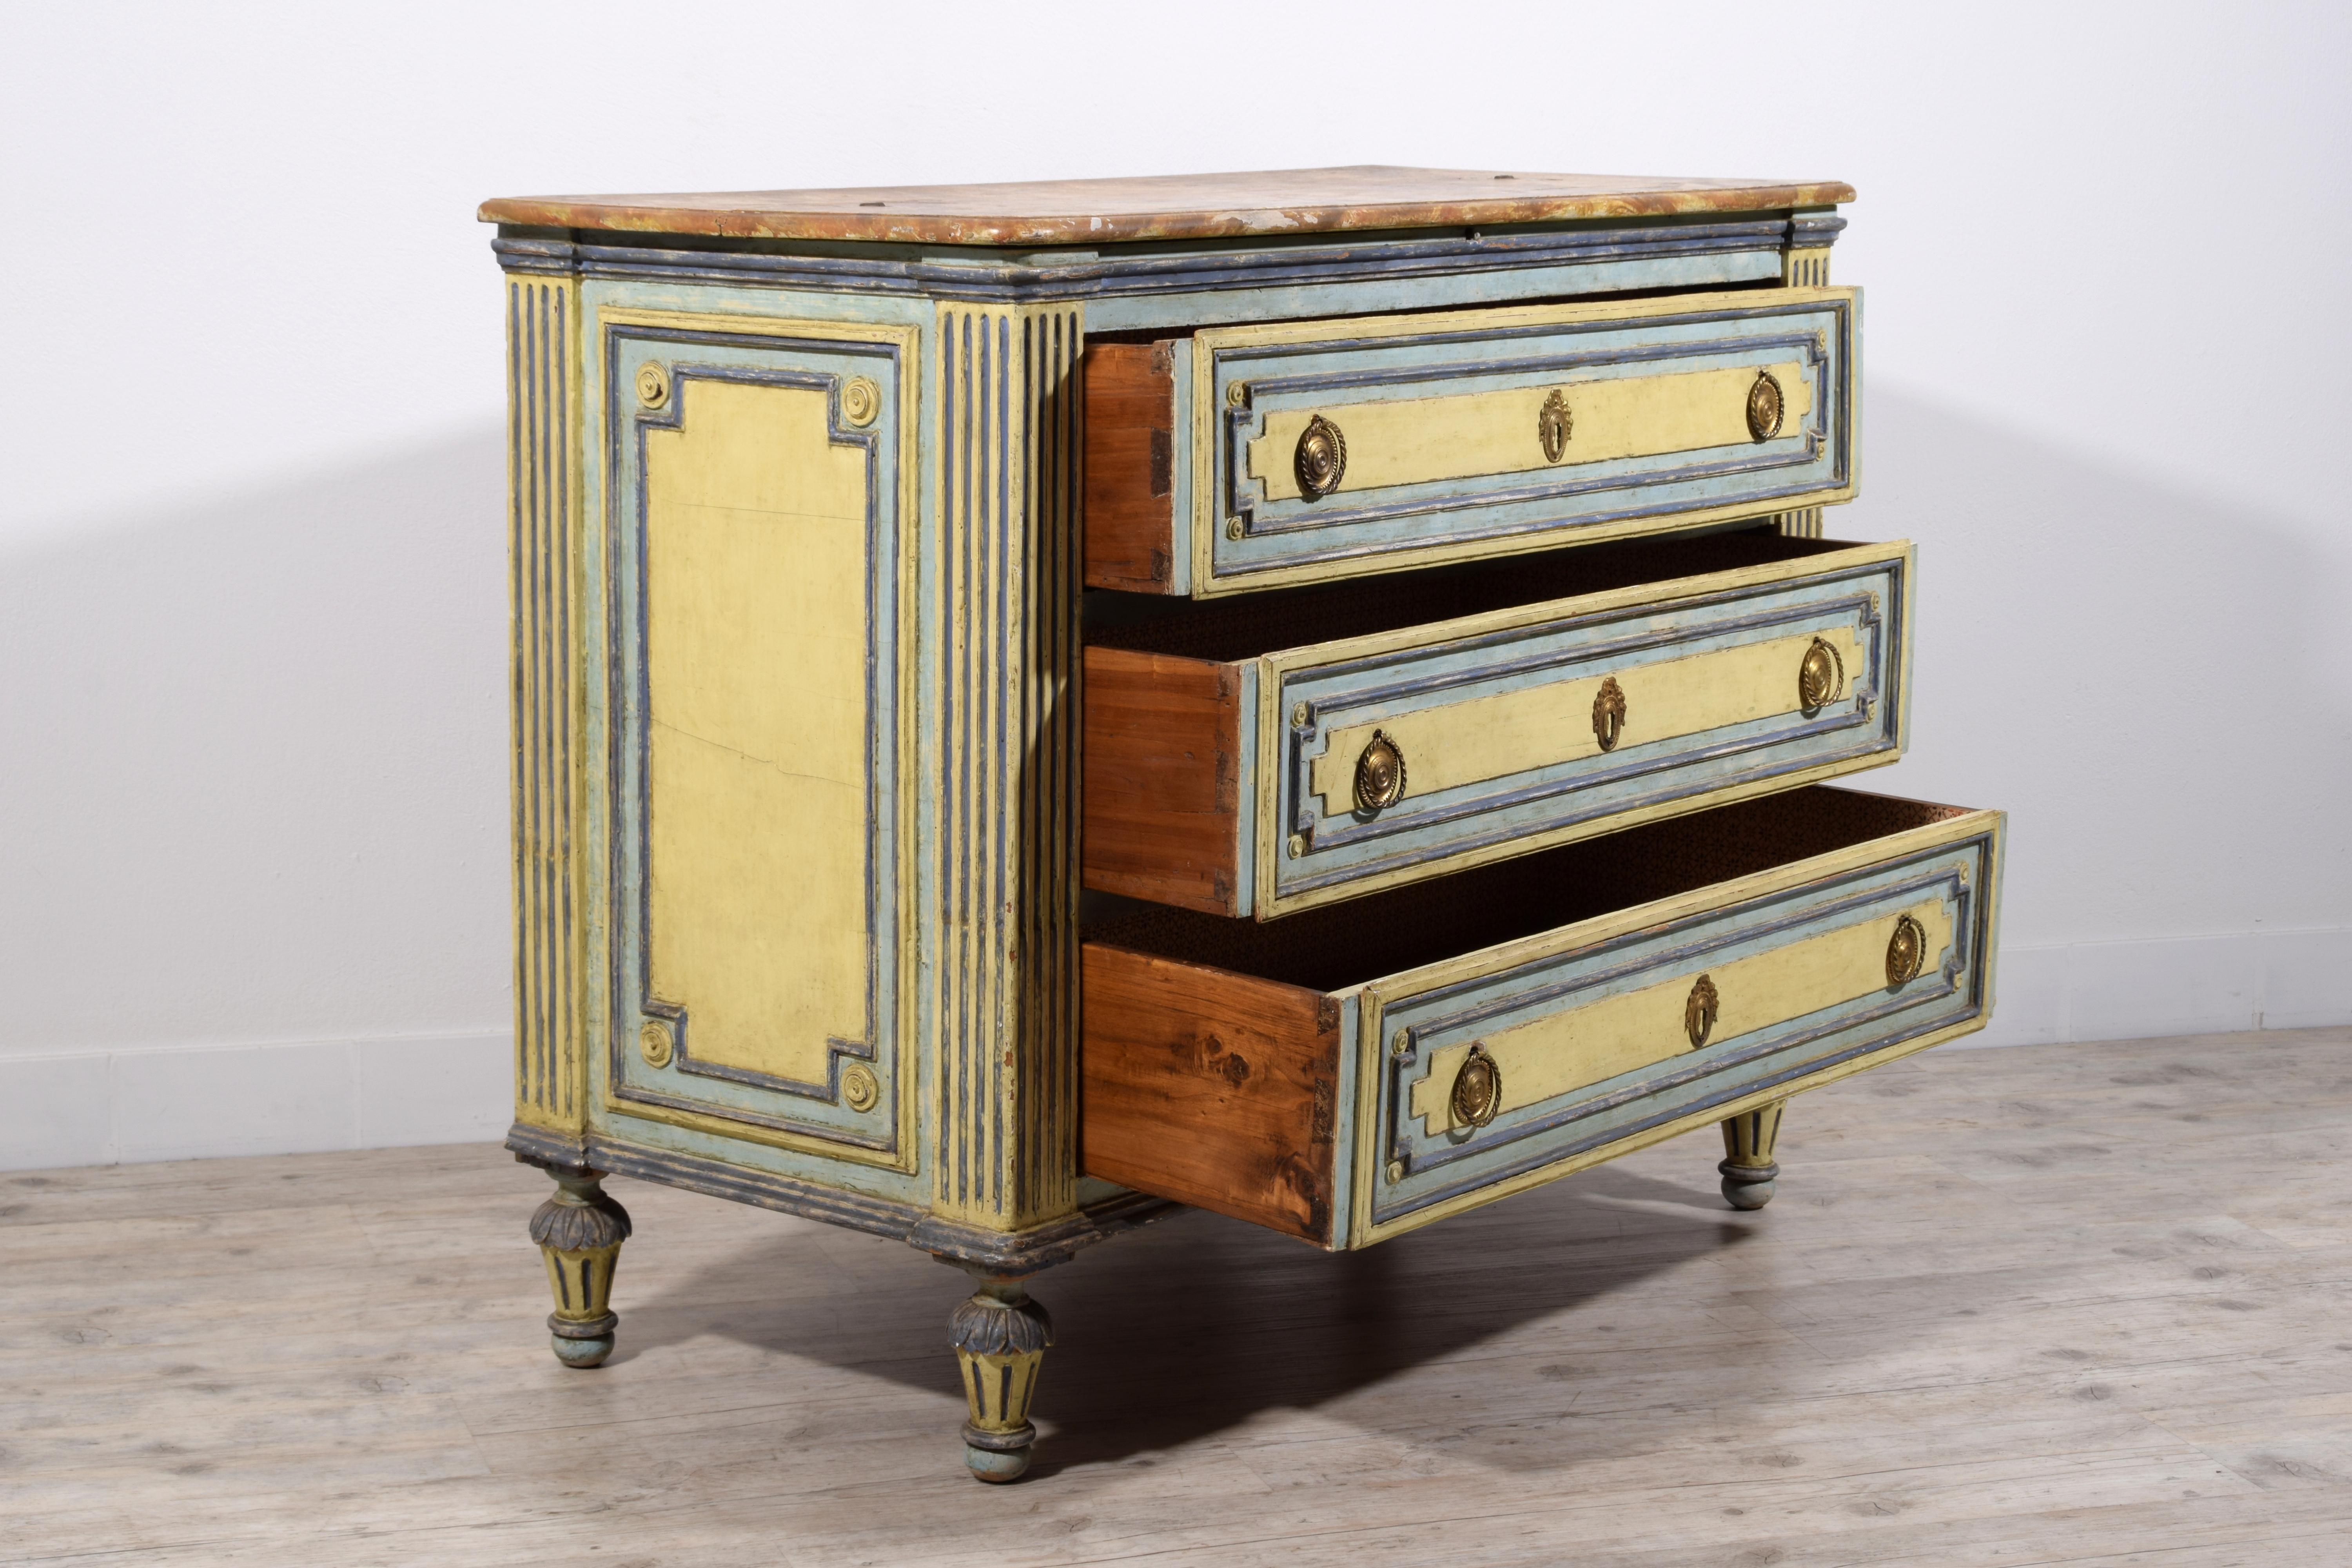 18th century, Italian Neoclassical Lacquered Wood Chest of Drawers  For Sale 6